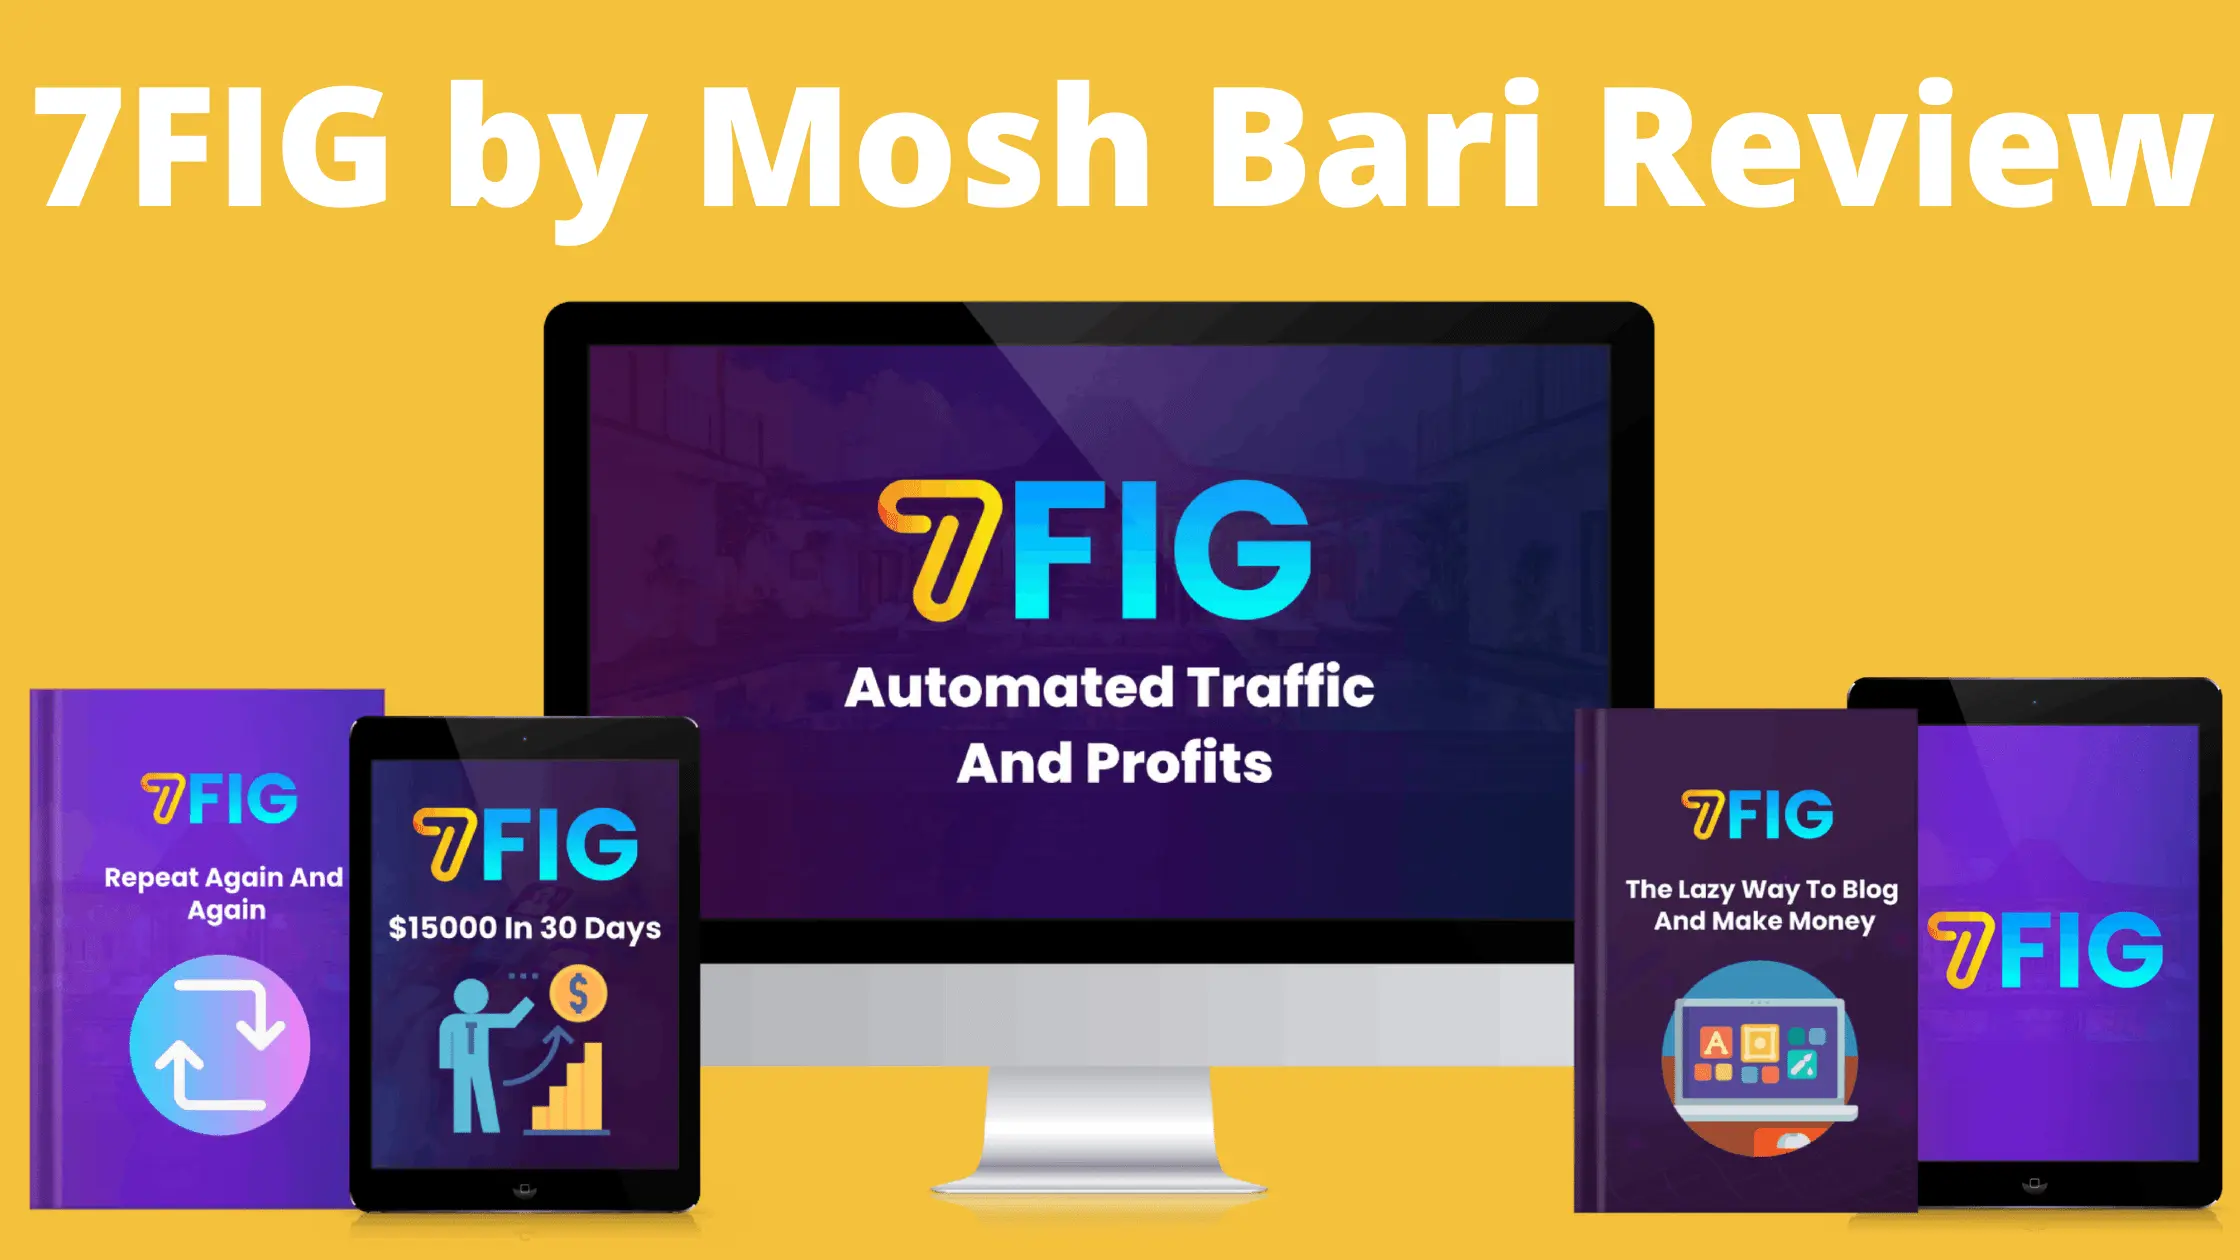 7FIG by Mosh Bari Review